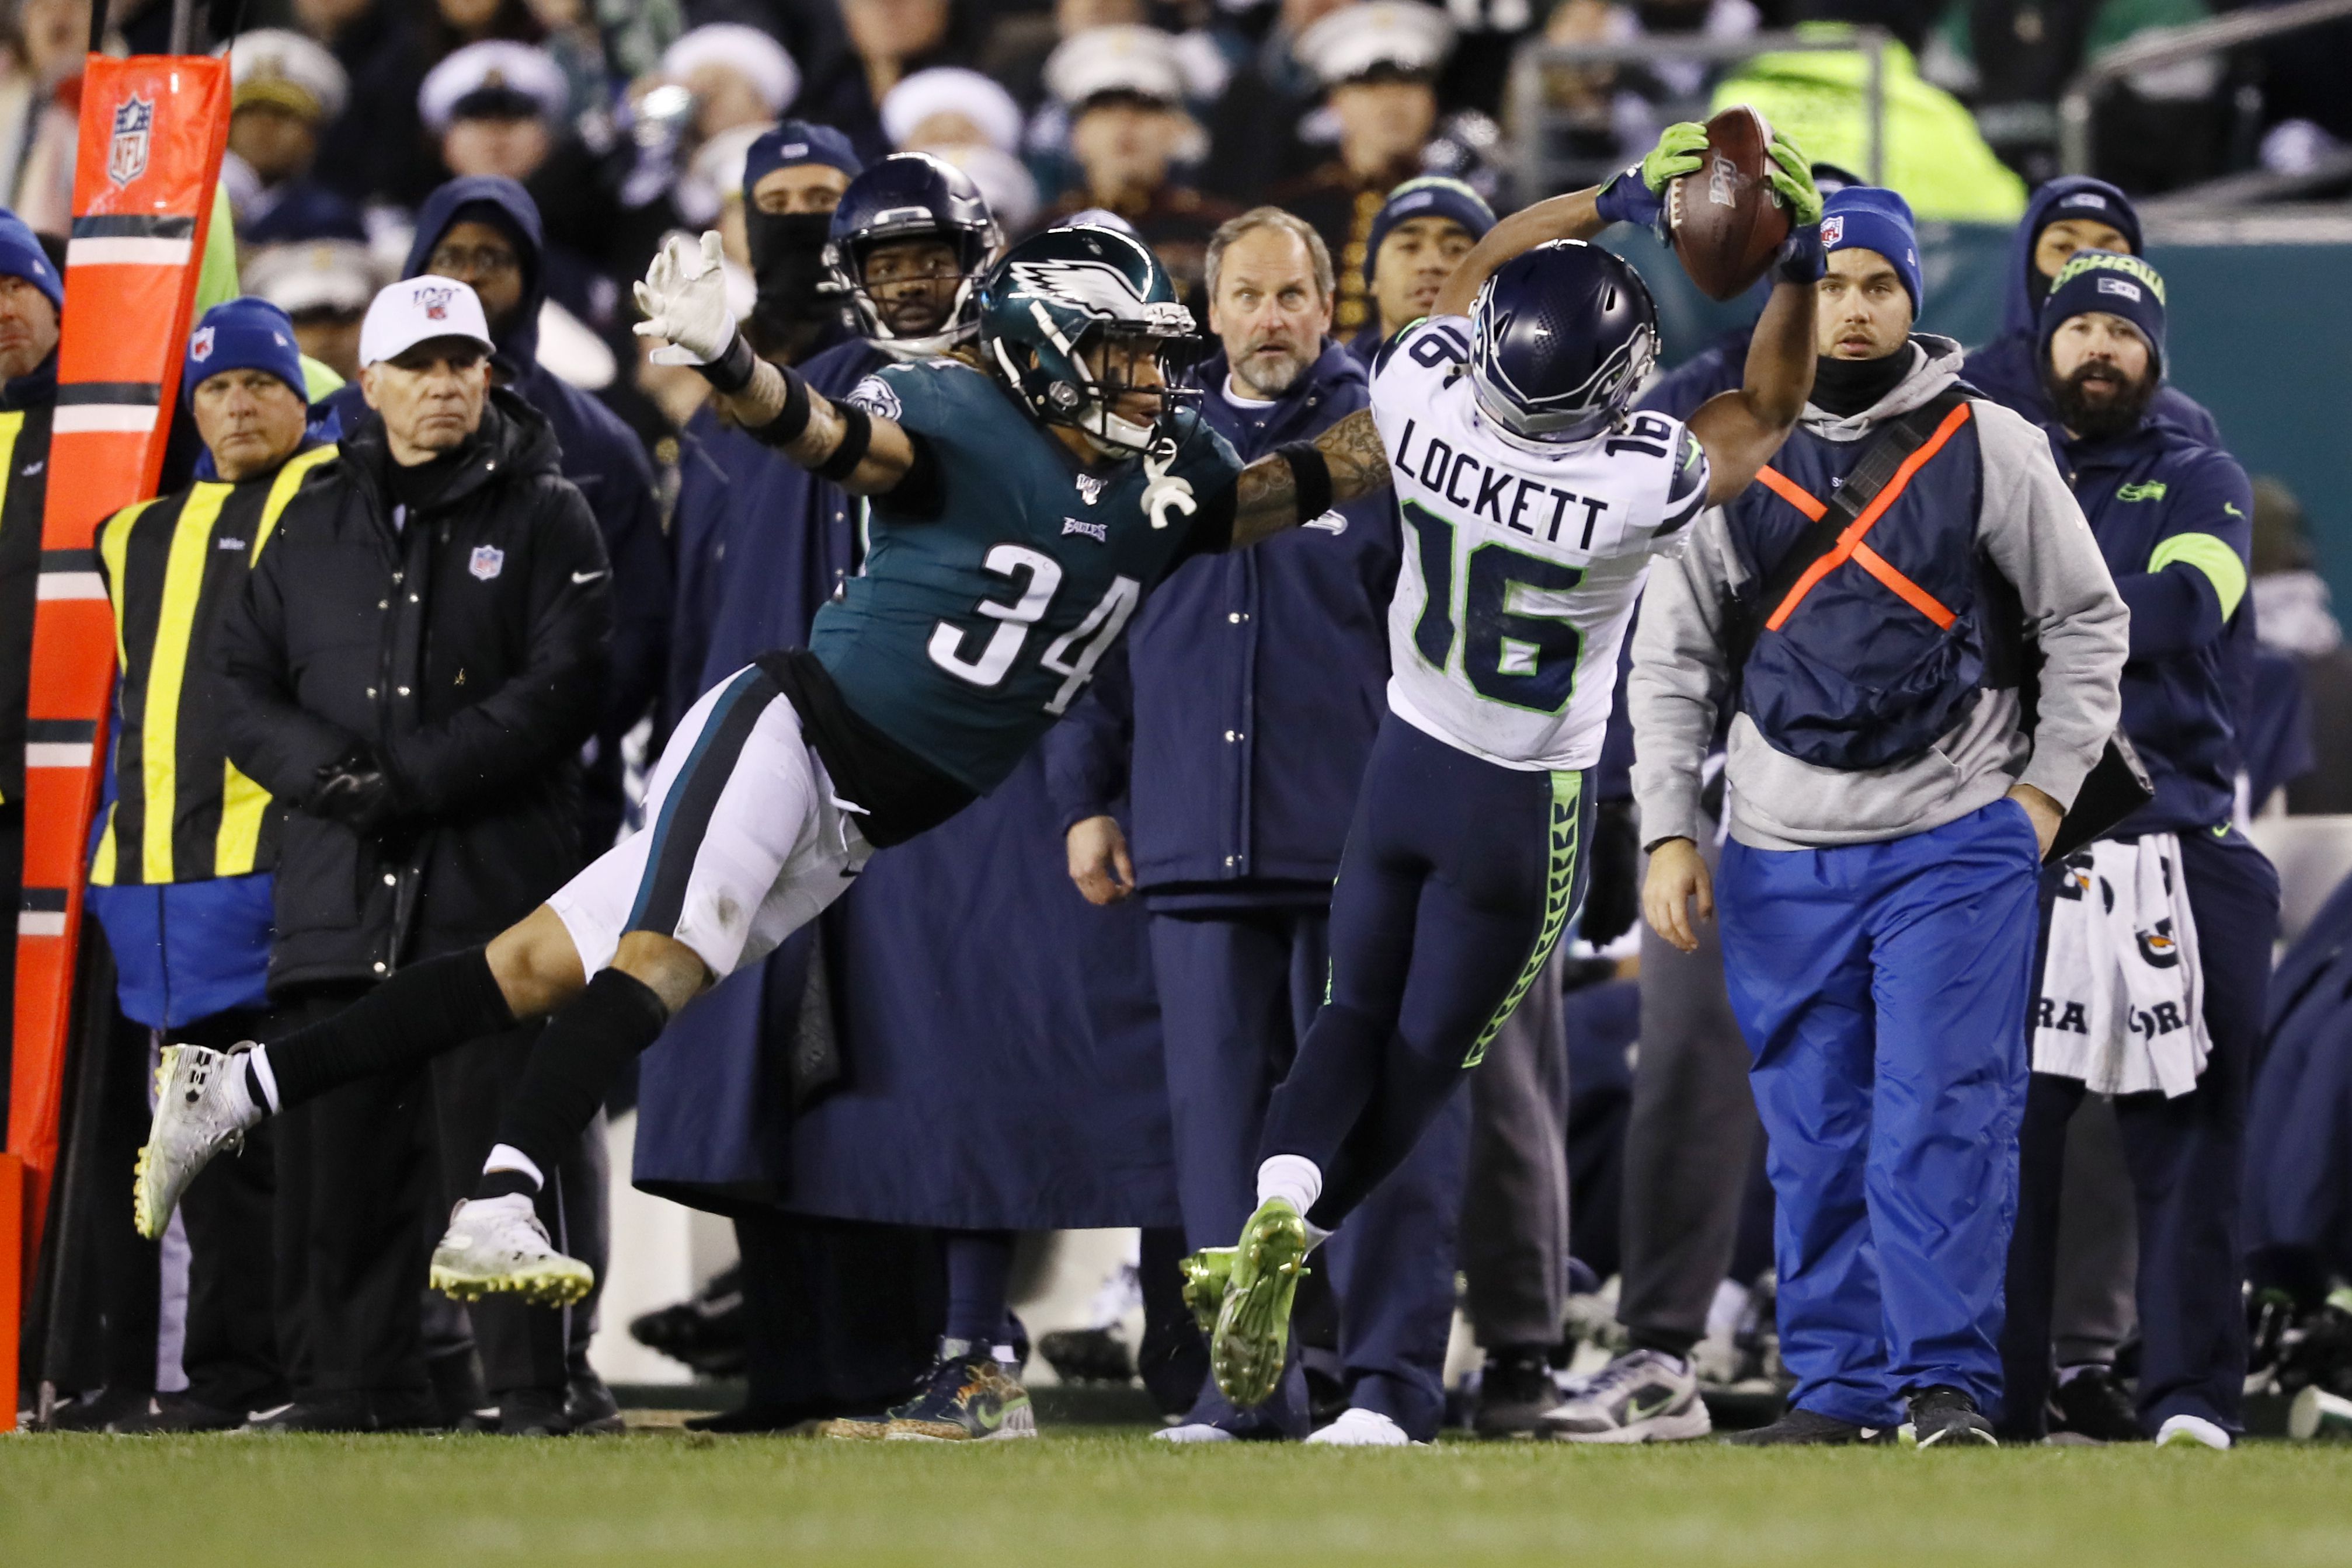 Seahawks vs. Eagles: Live stream, start time, TV channel (NFL Playoffs) 